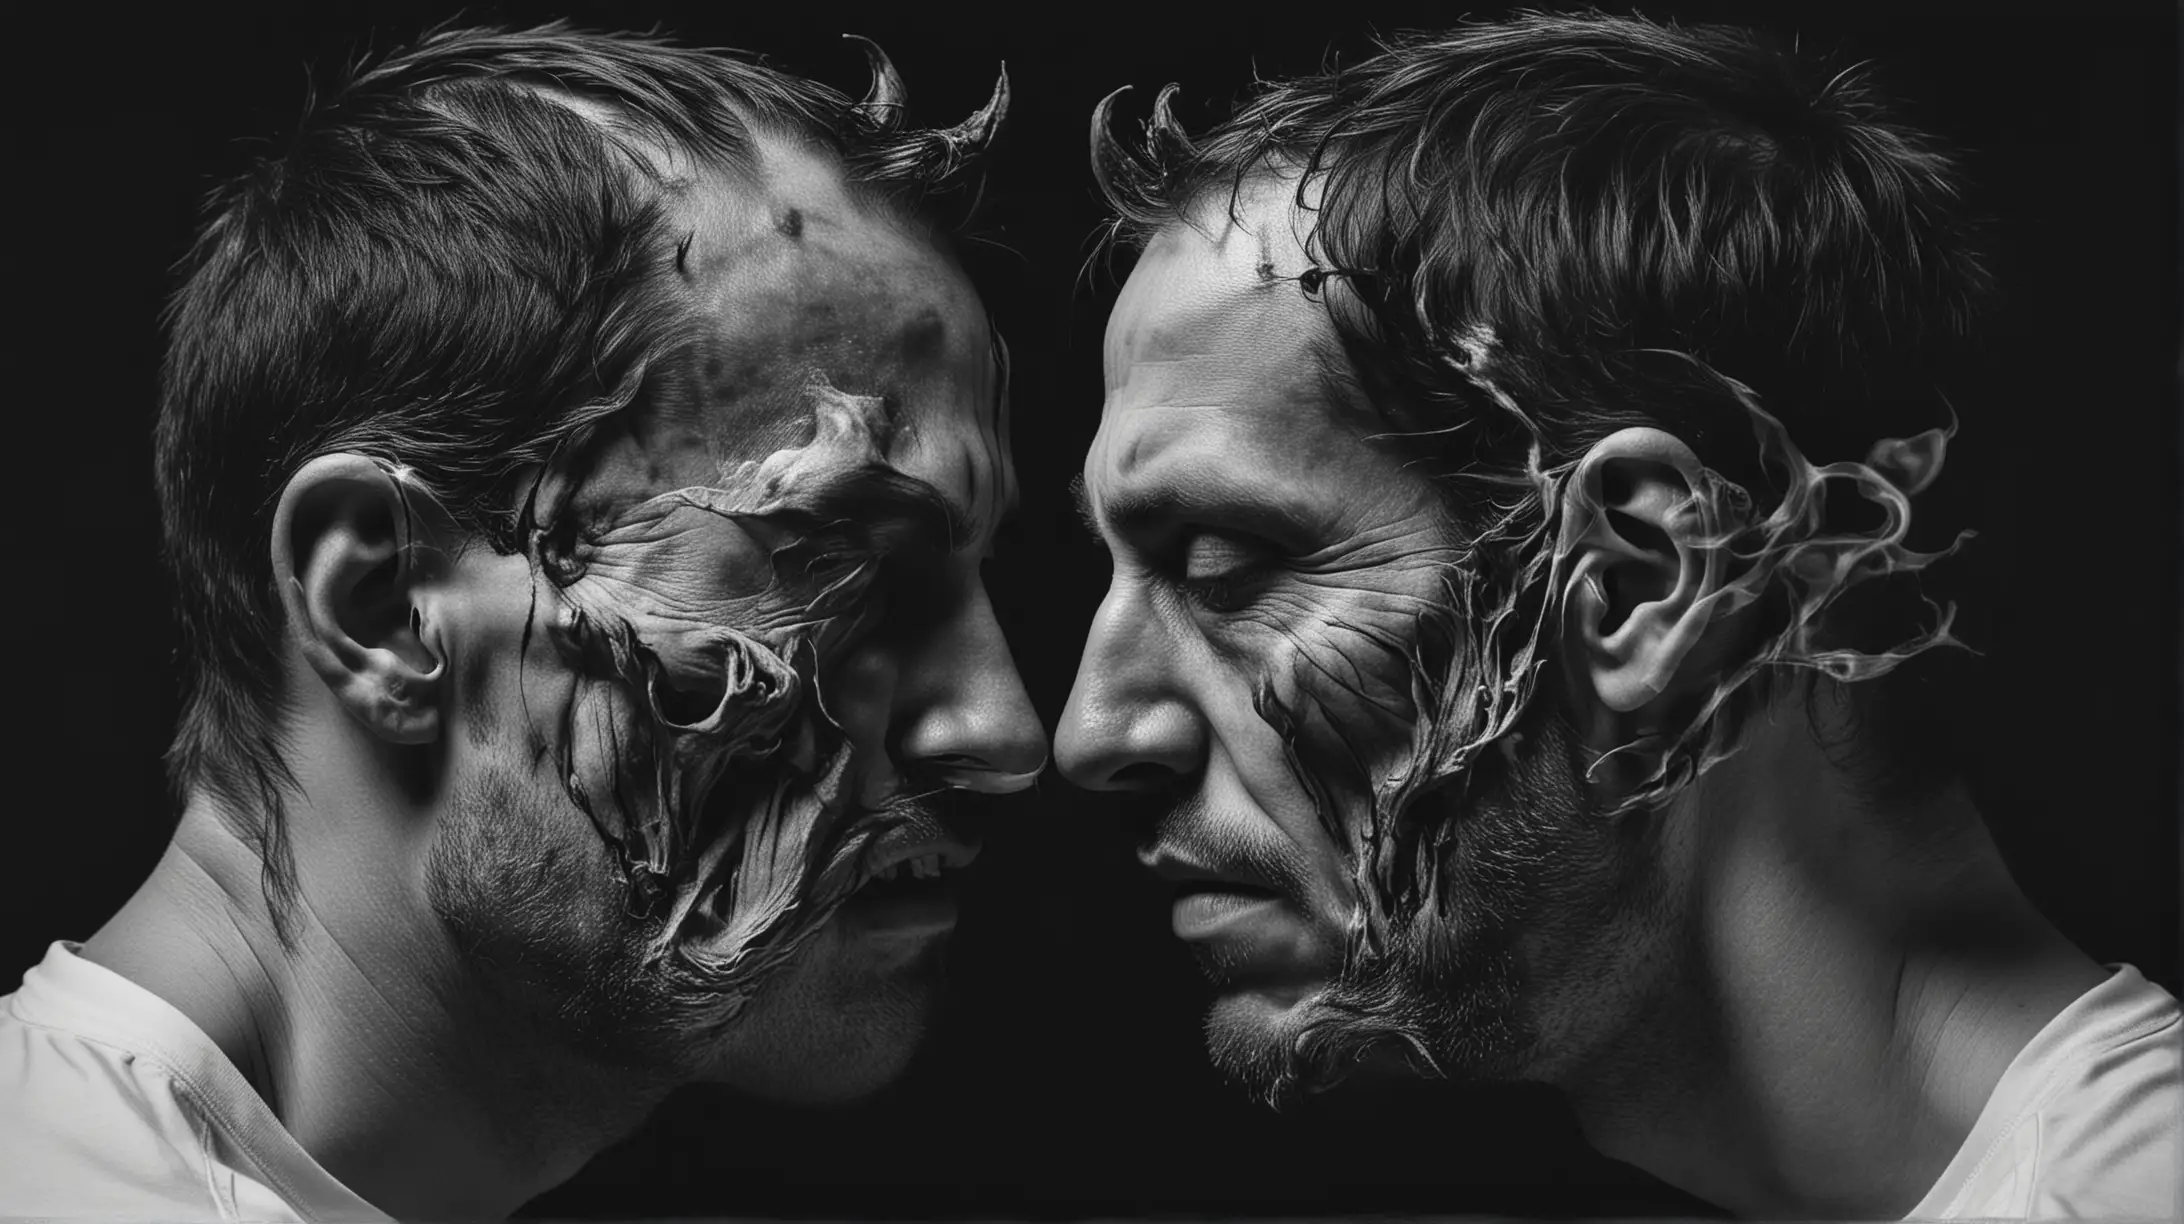 2 heads merging, pulling away at a man's face to the side, black and white, distorted, warped, surreal art photography, devil, demonic, charcoal, bipolar disorder, depressed, dark, sad, evil, lonely